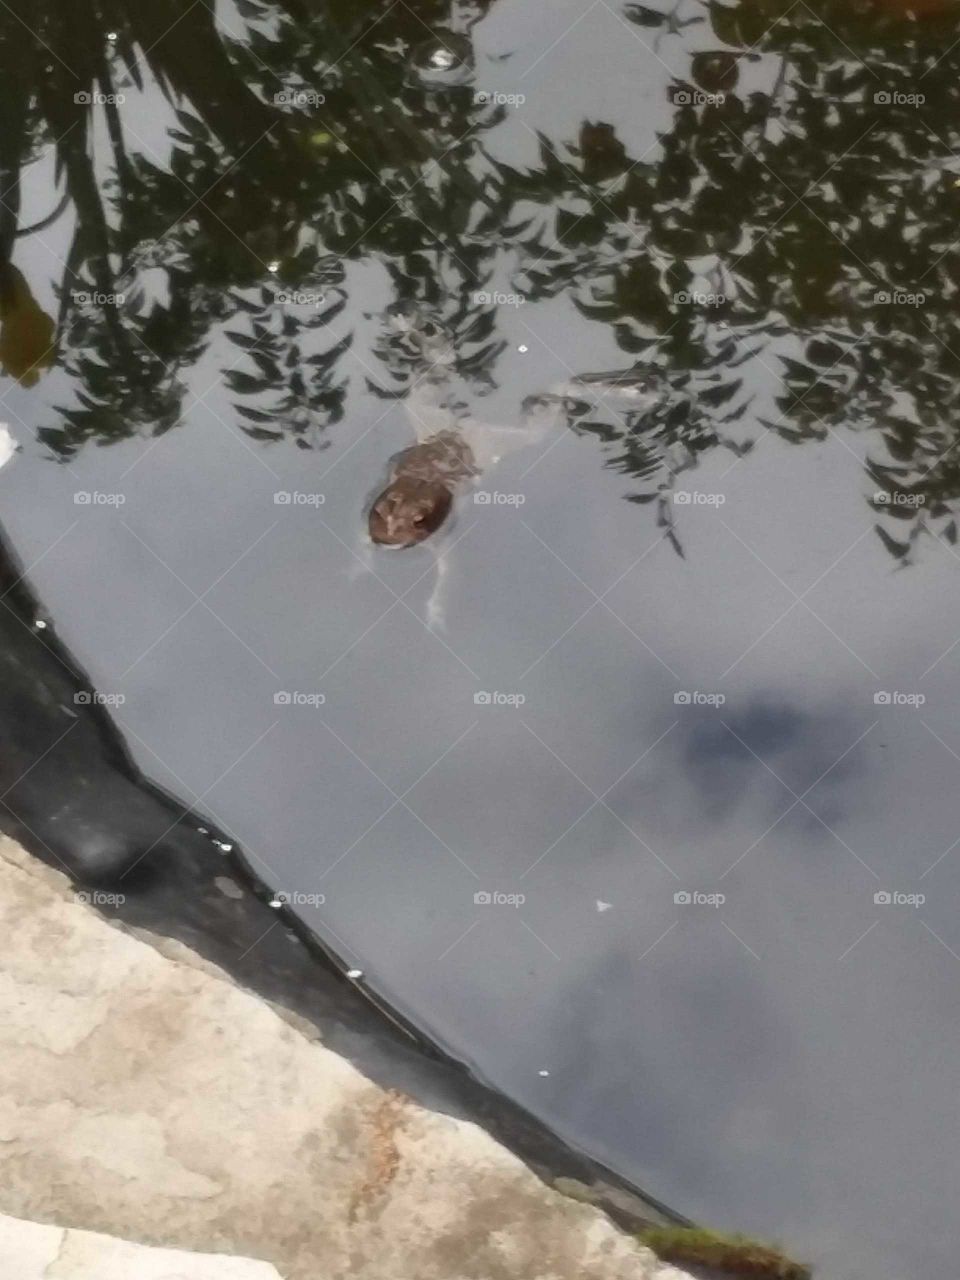 Adorable Little Frog Swimming in this Murky Little Pond